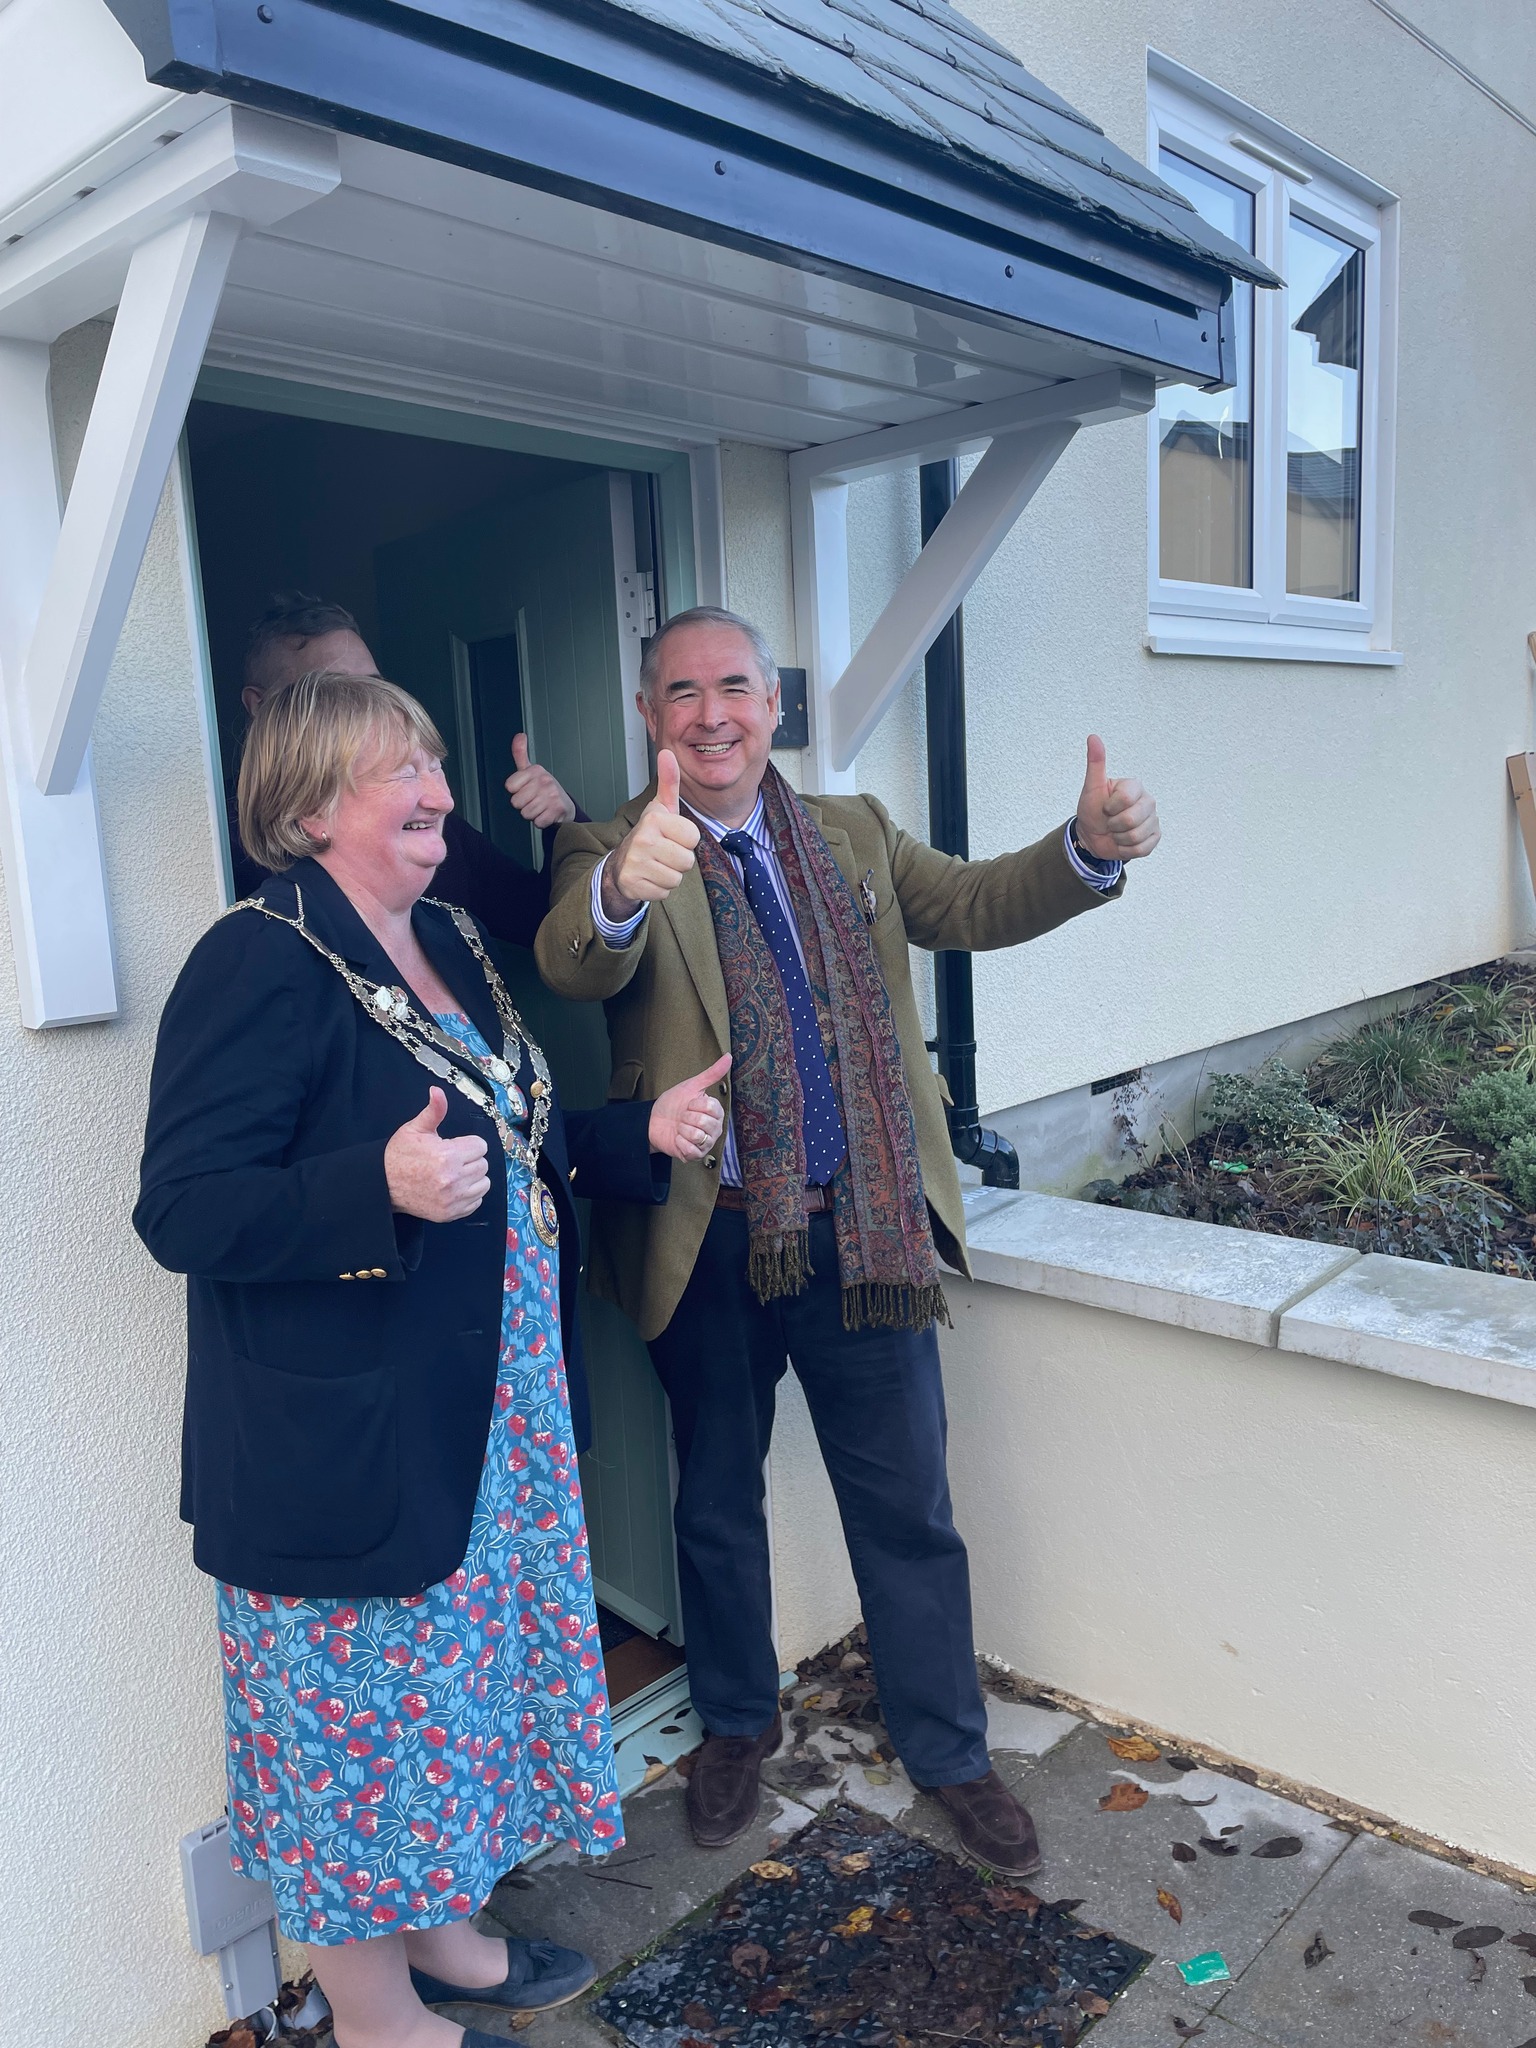 Geoffrey gives new housing the thumbs up